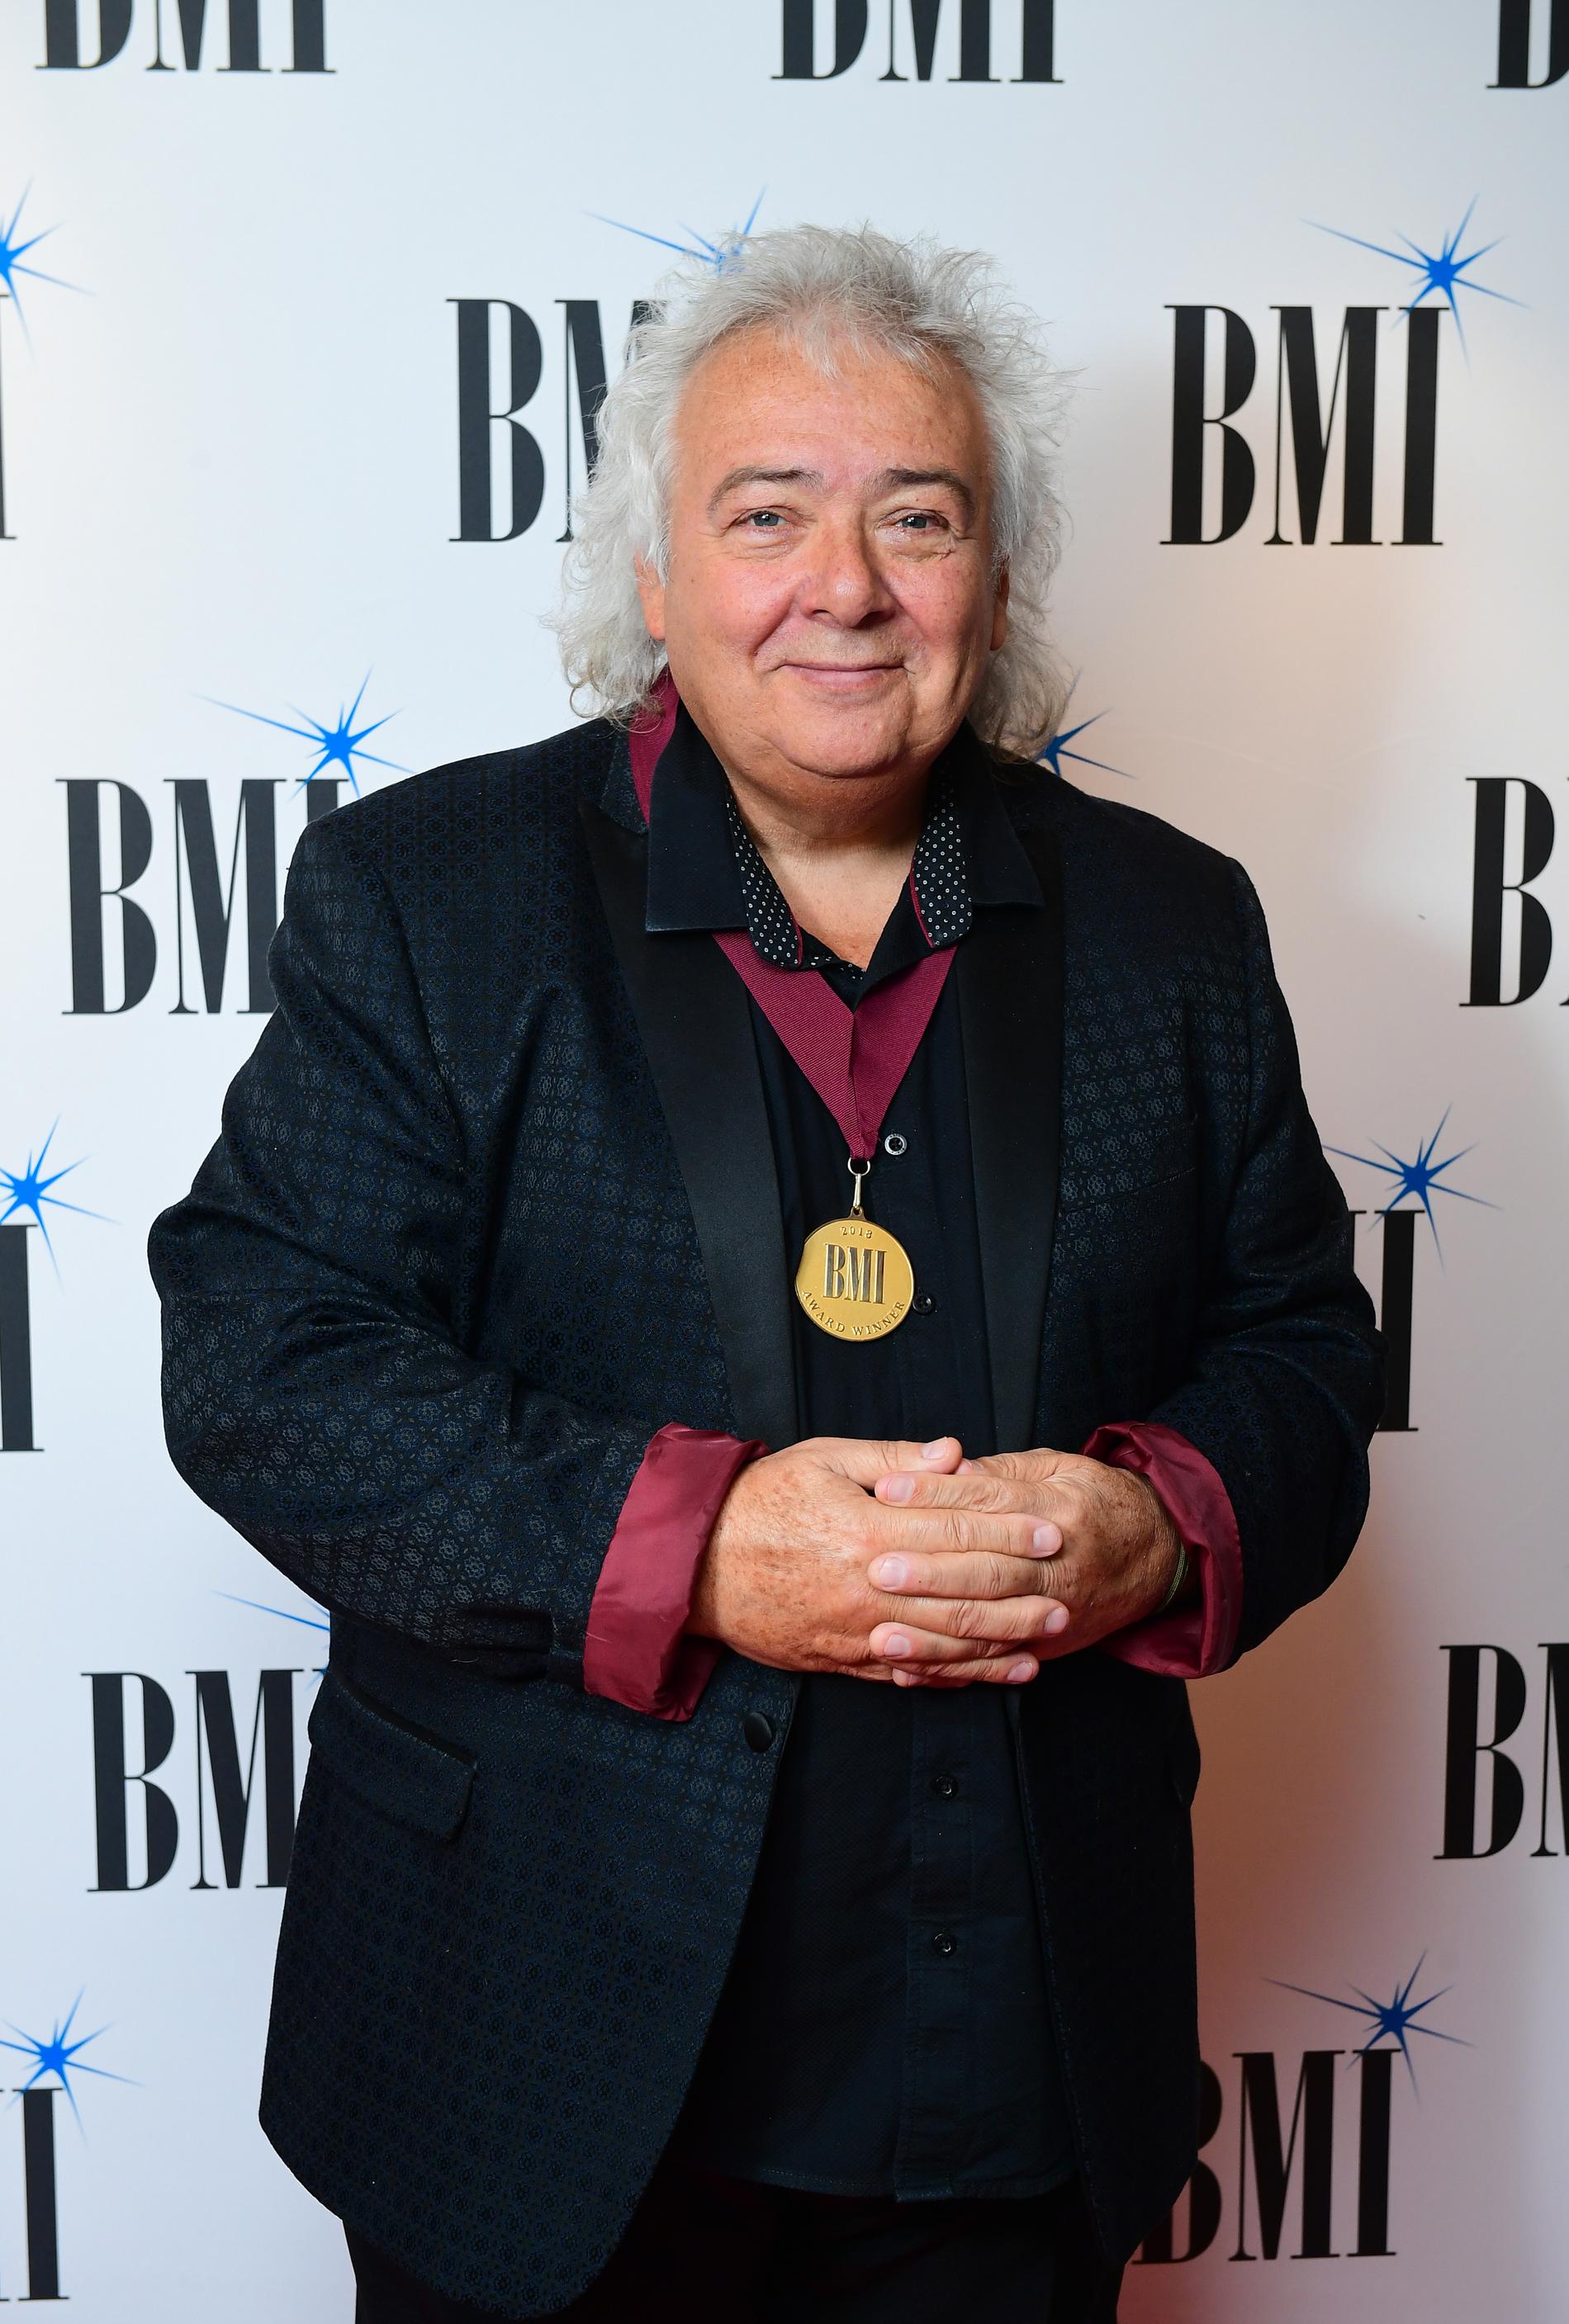 White Snake legend Bernie Marsden (age 72) – David Coverdale has passed away in mourning